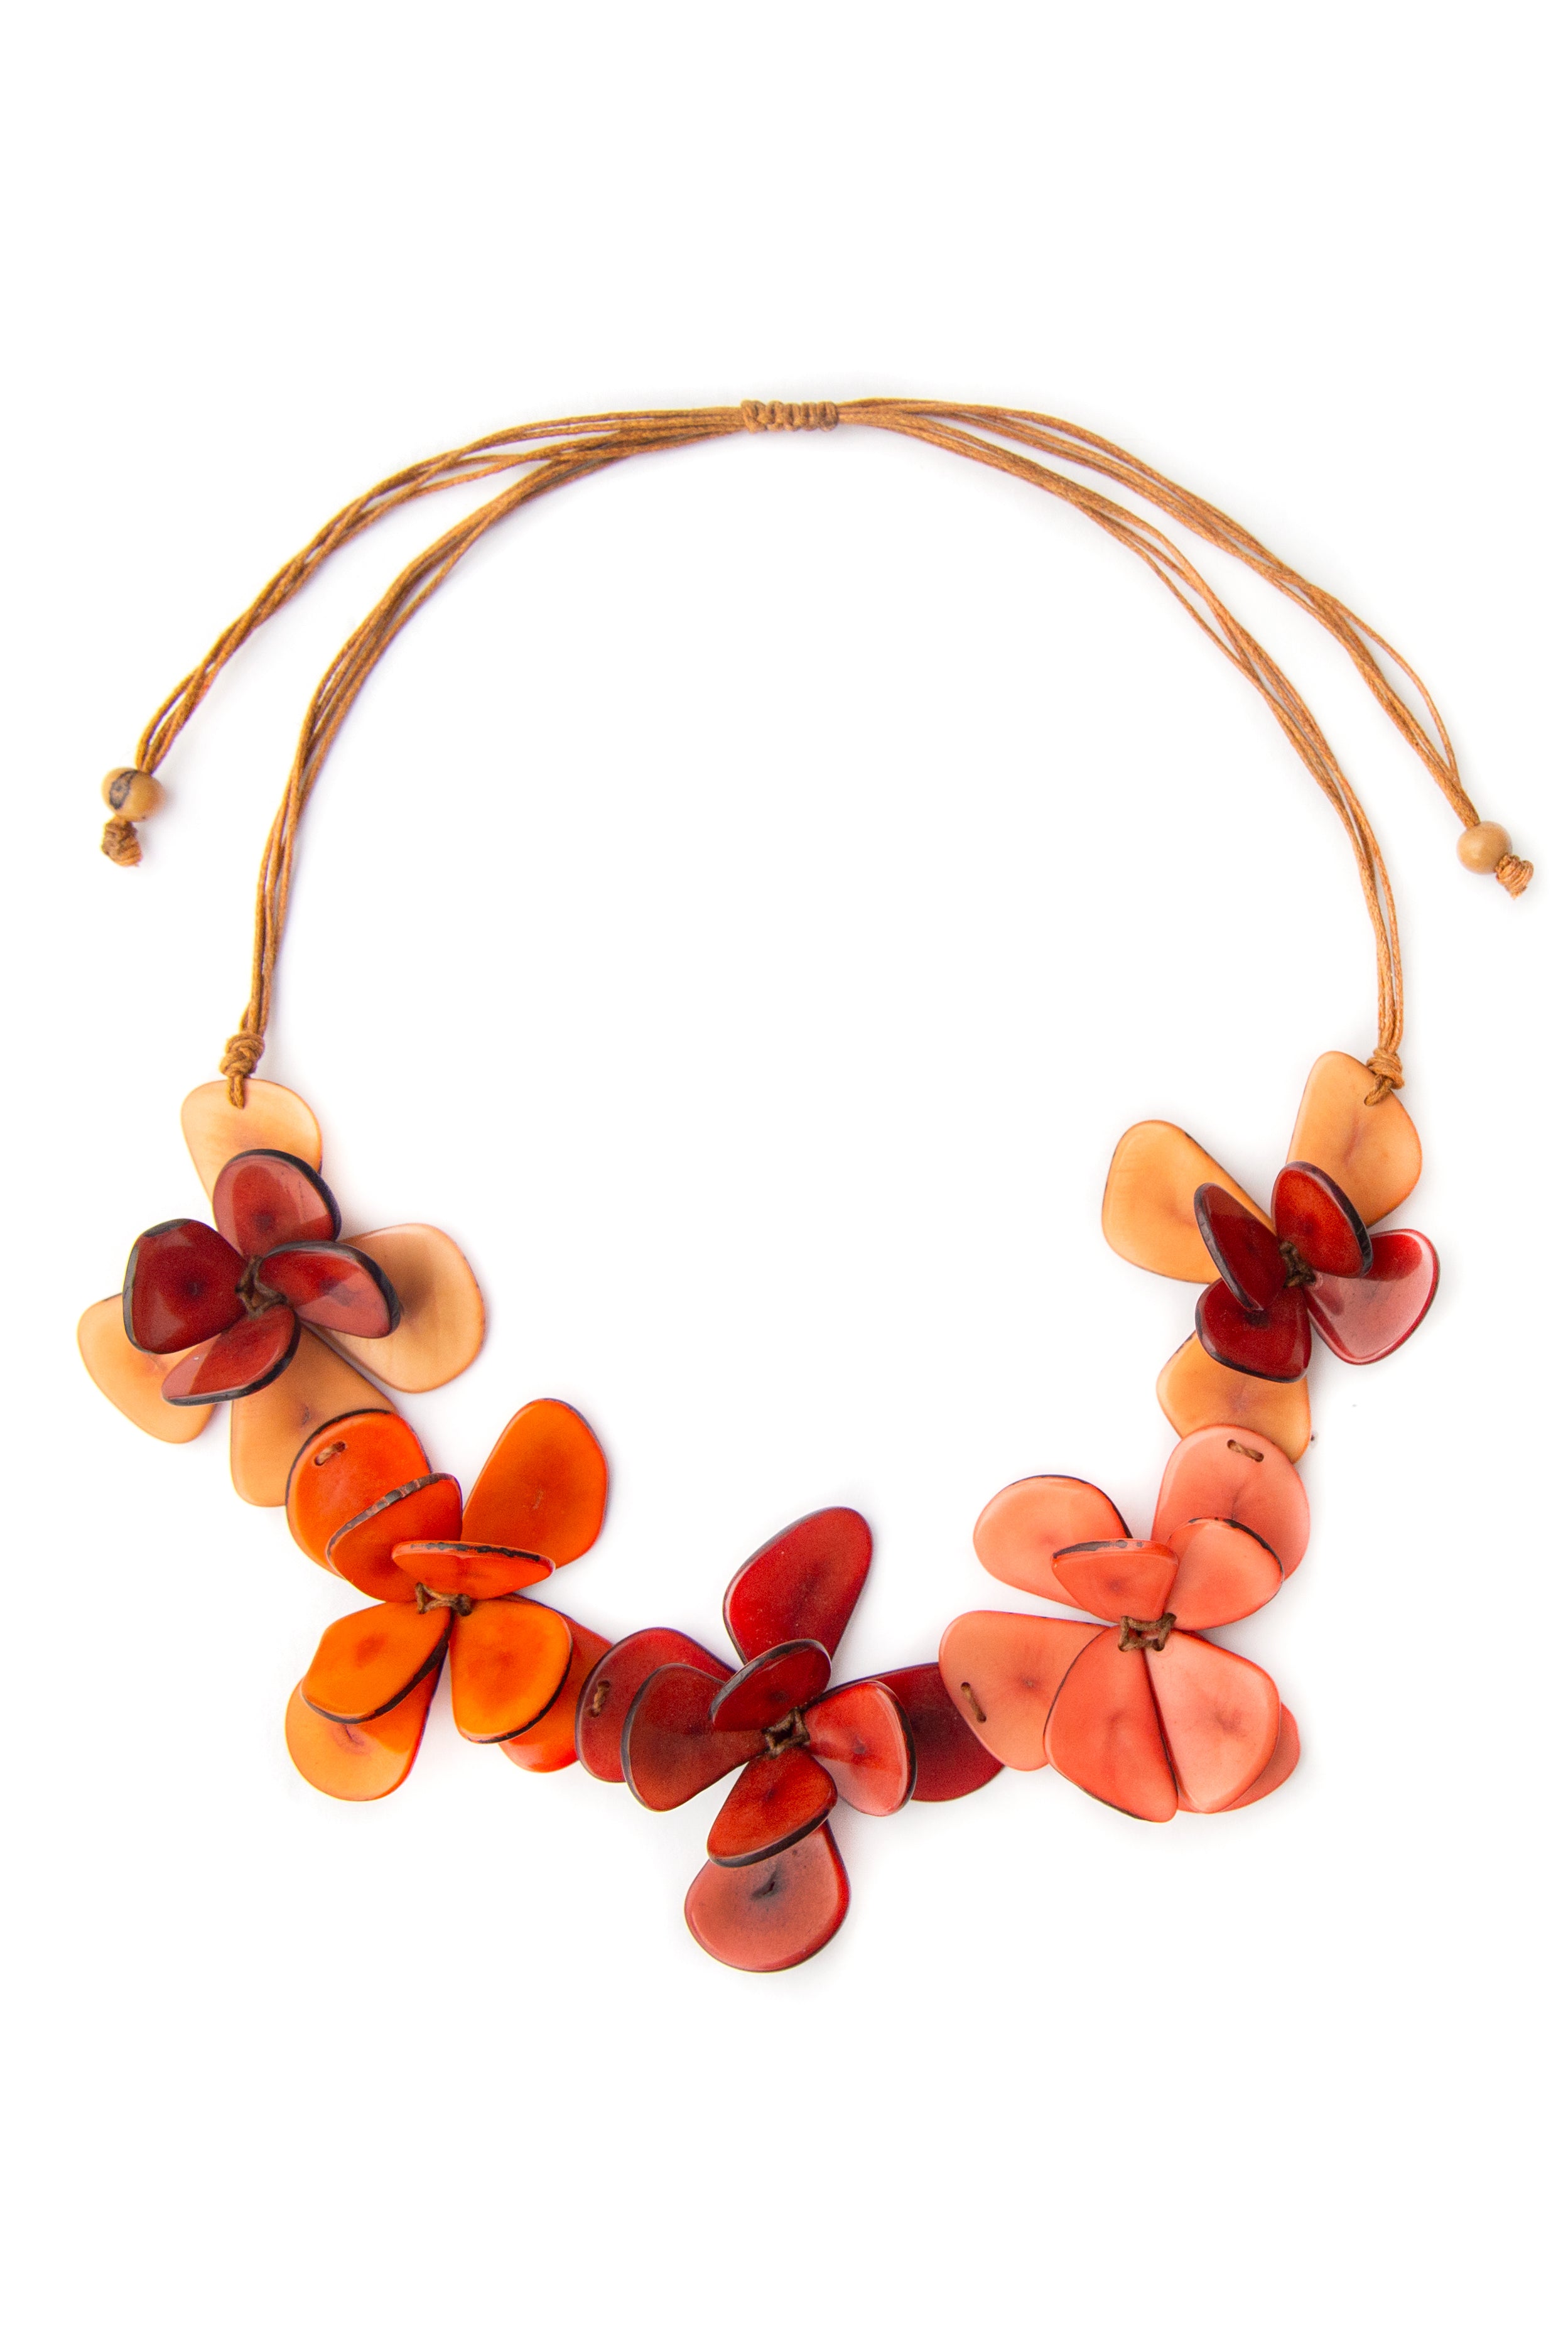 Organic Tagua Jewelry (SC1727) Florence Necklace - Orange and red flowers sculpted from tague nut slices for a chunky adjustable necklace